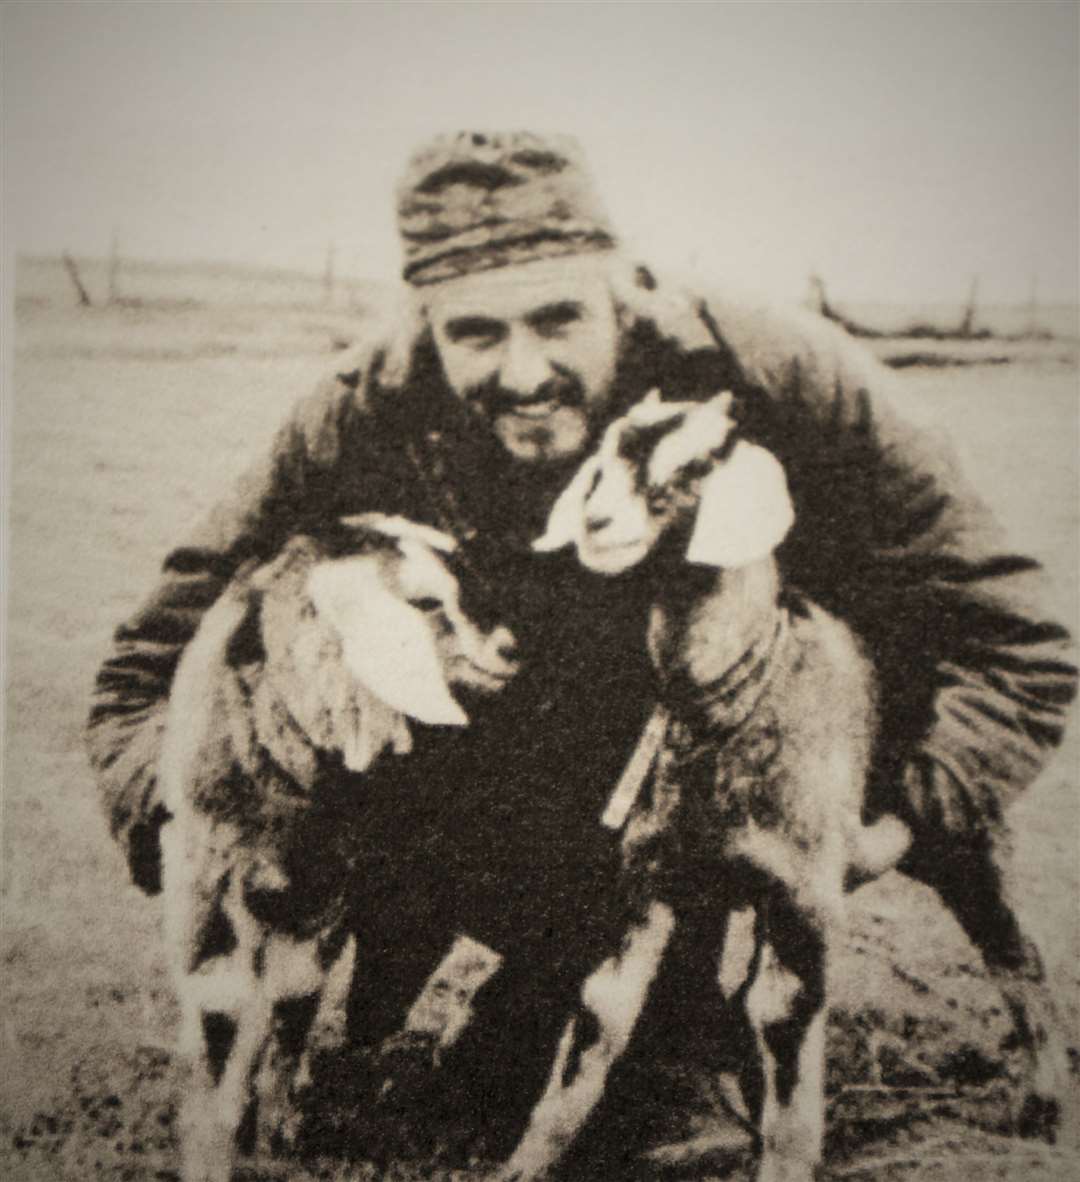 A picture in the book showing Marcus with two of his goat friends.